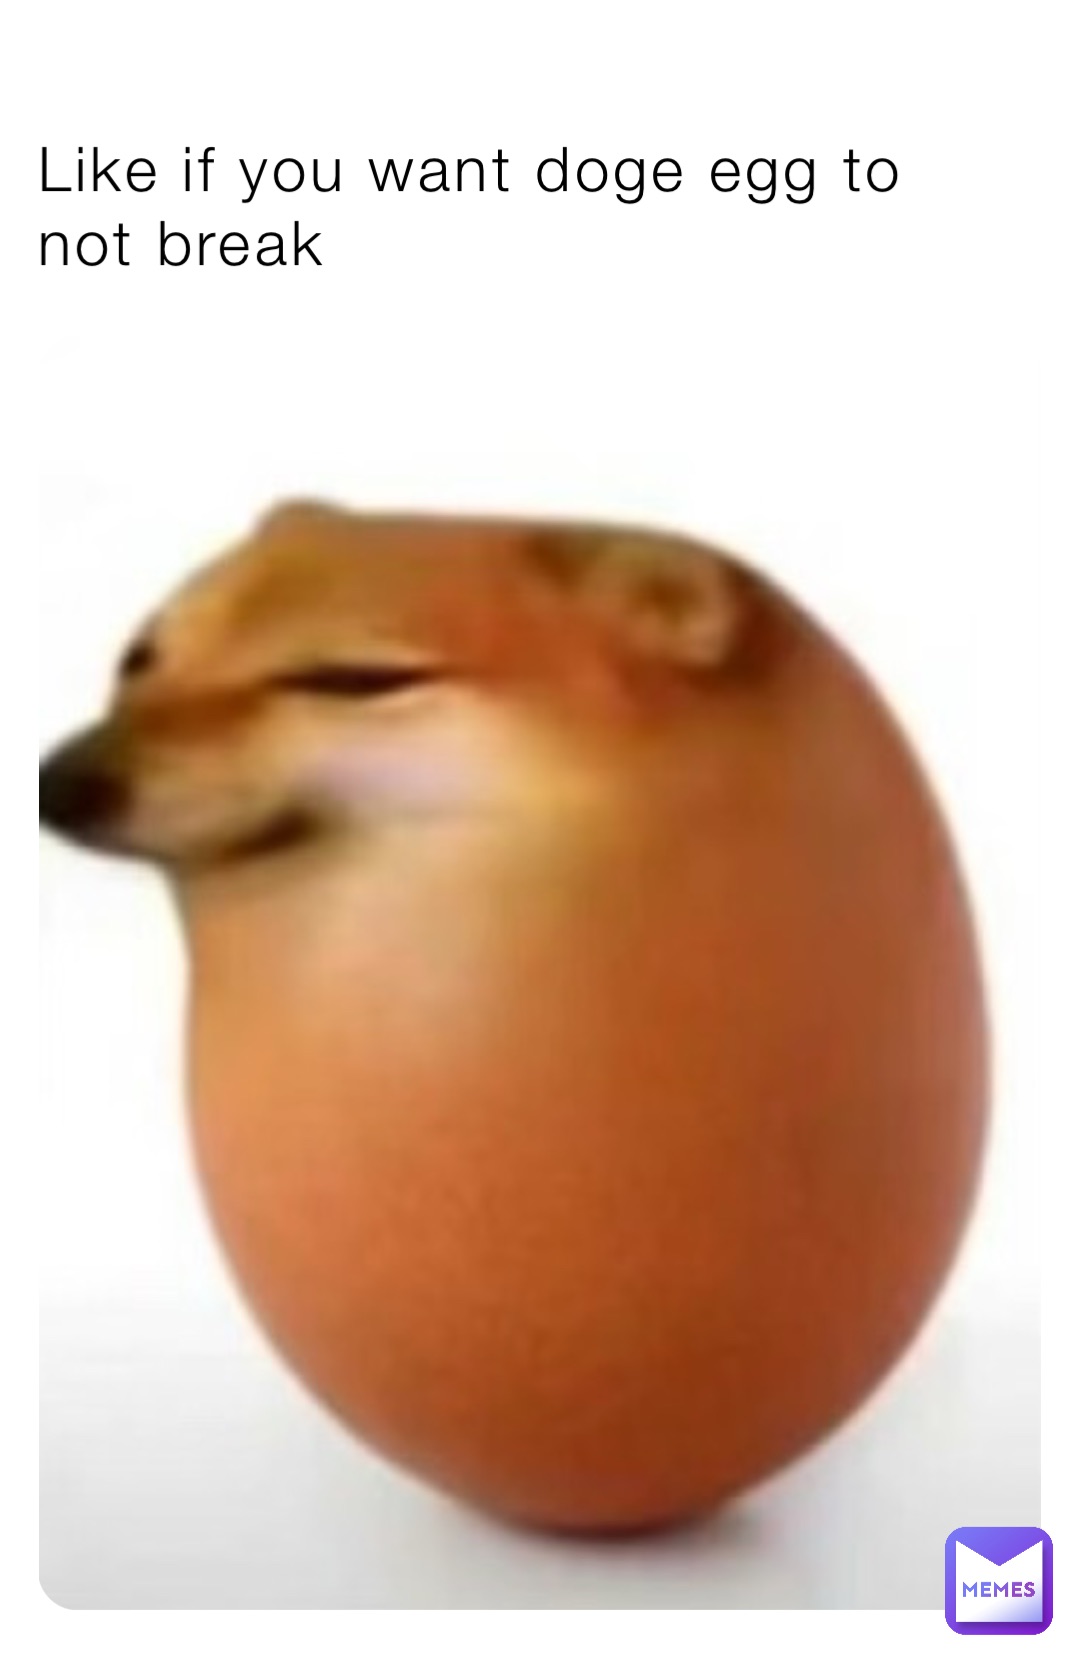 Like if you want doge egg to not break